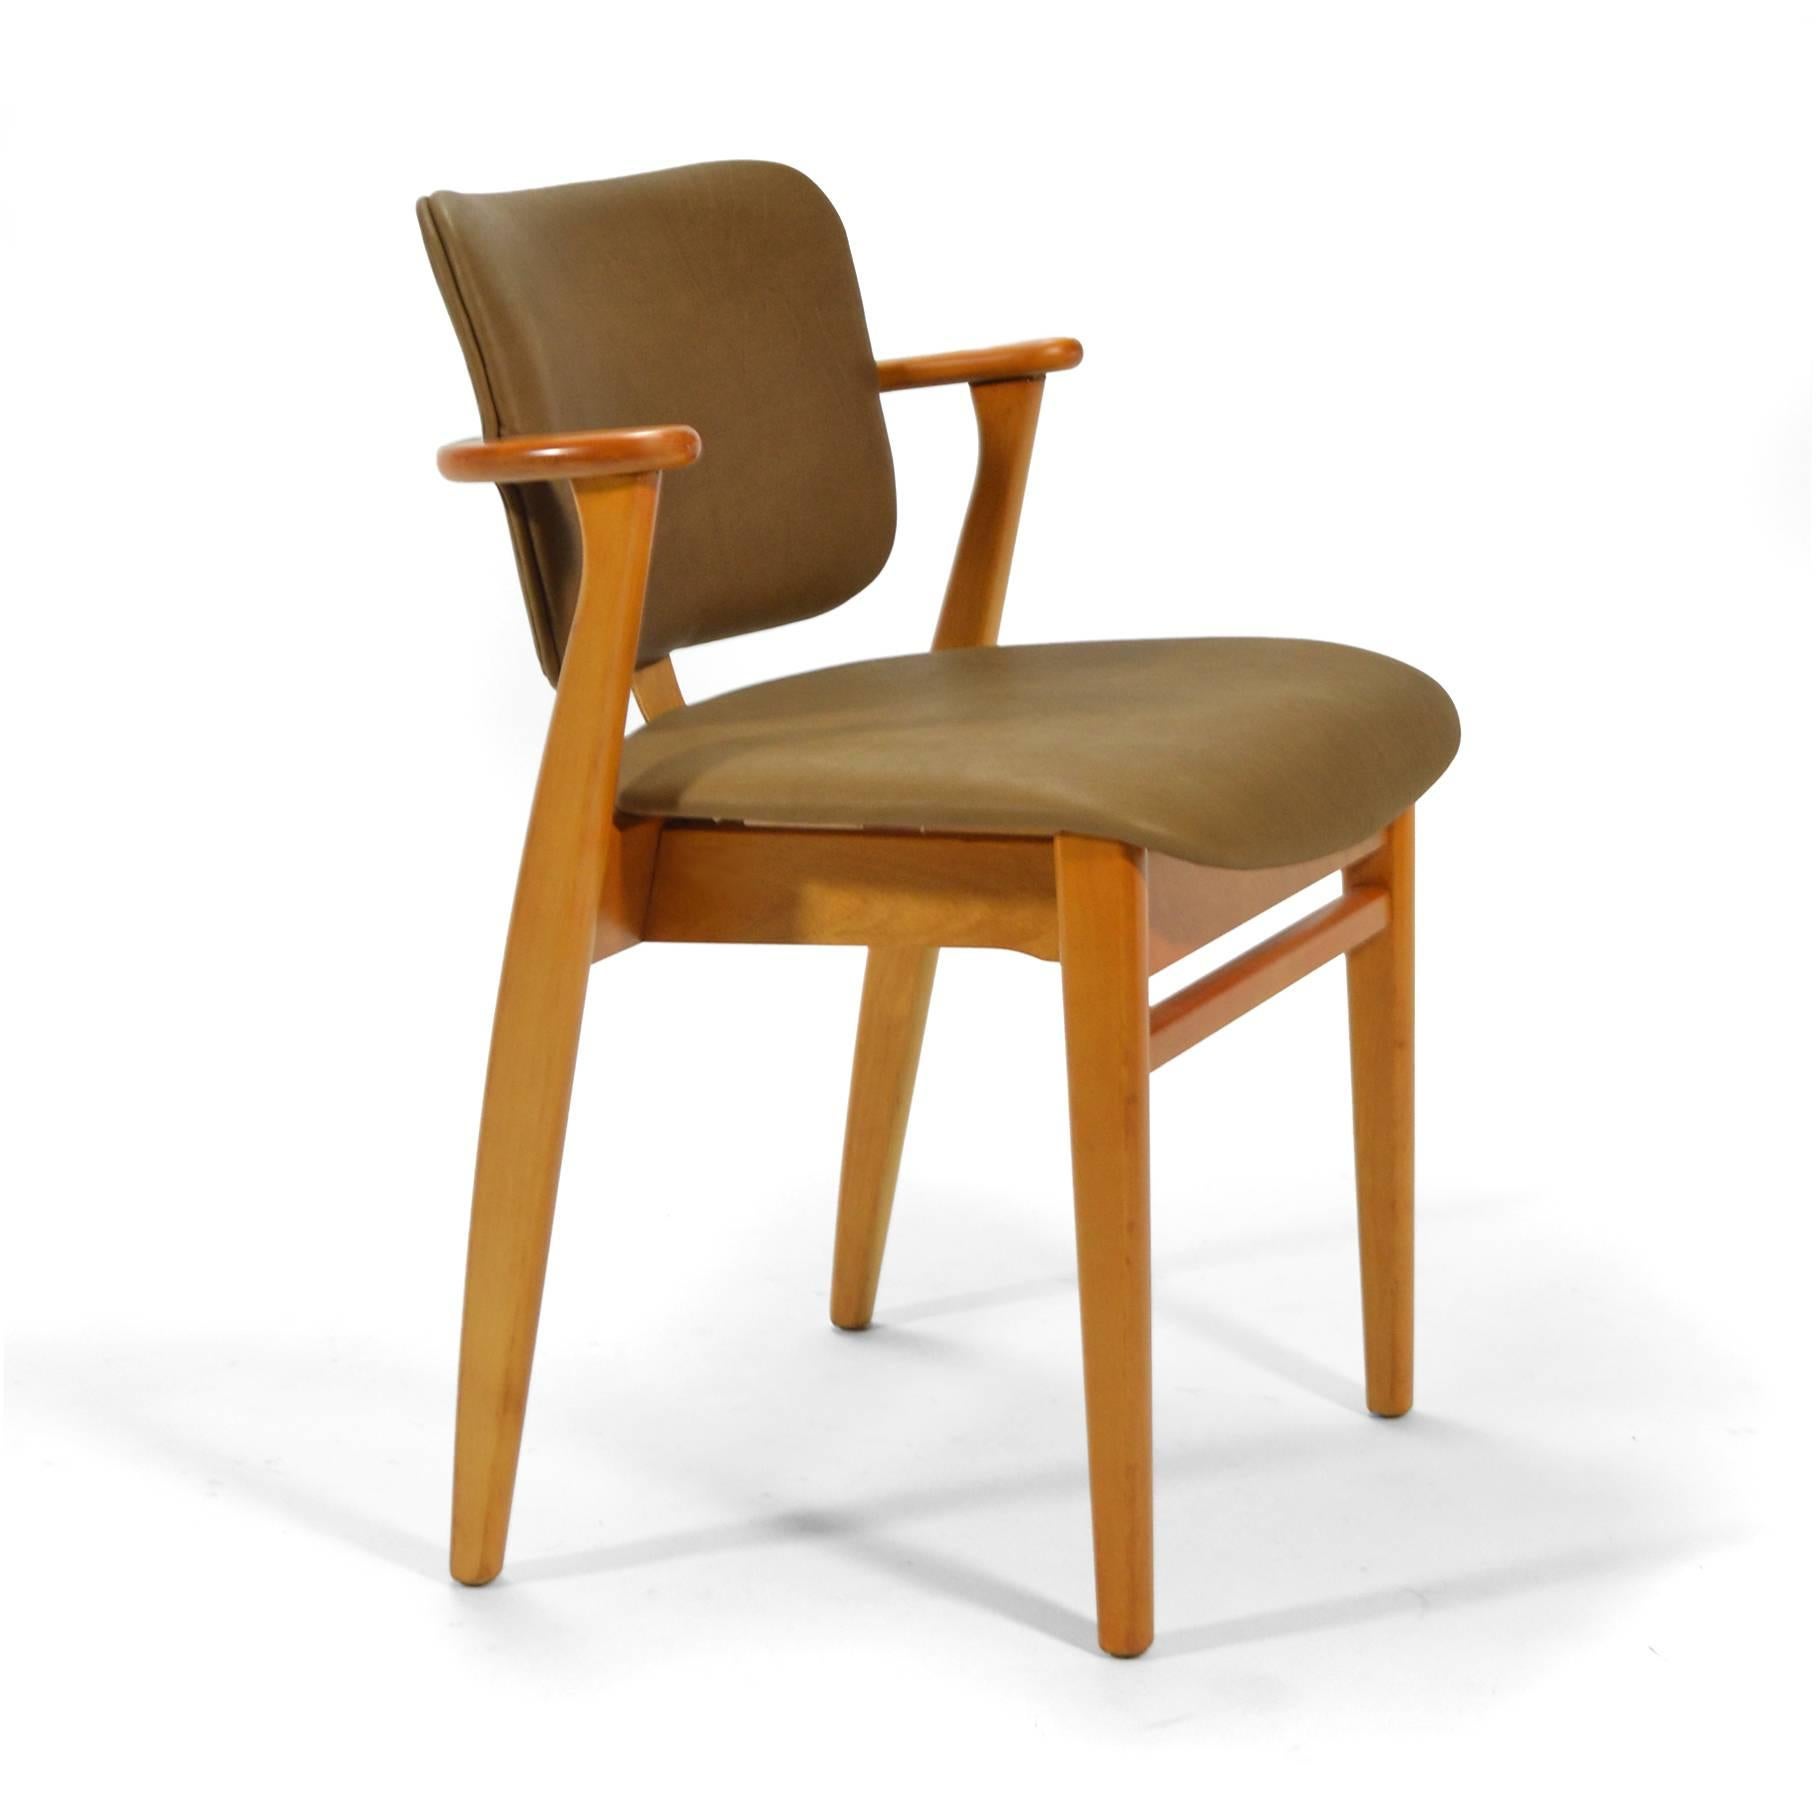 A wonderful 1946 design by Ilmari Tapiovaara, the Domus chair was offered entirely of wood, with an upholstered seat, or an upholstered seat and back. This nice example, has beautiful new leather upholstery . 

The scale of the design and the